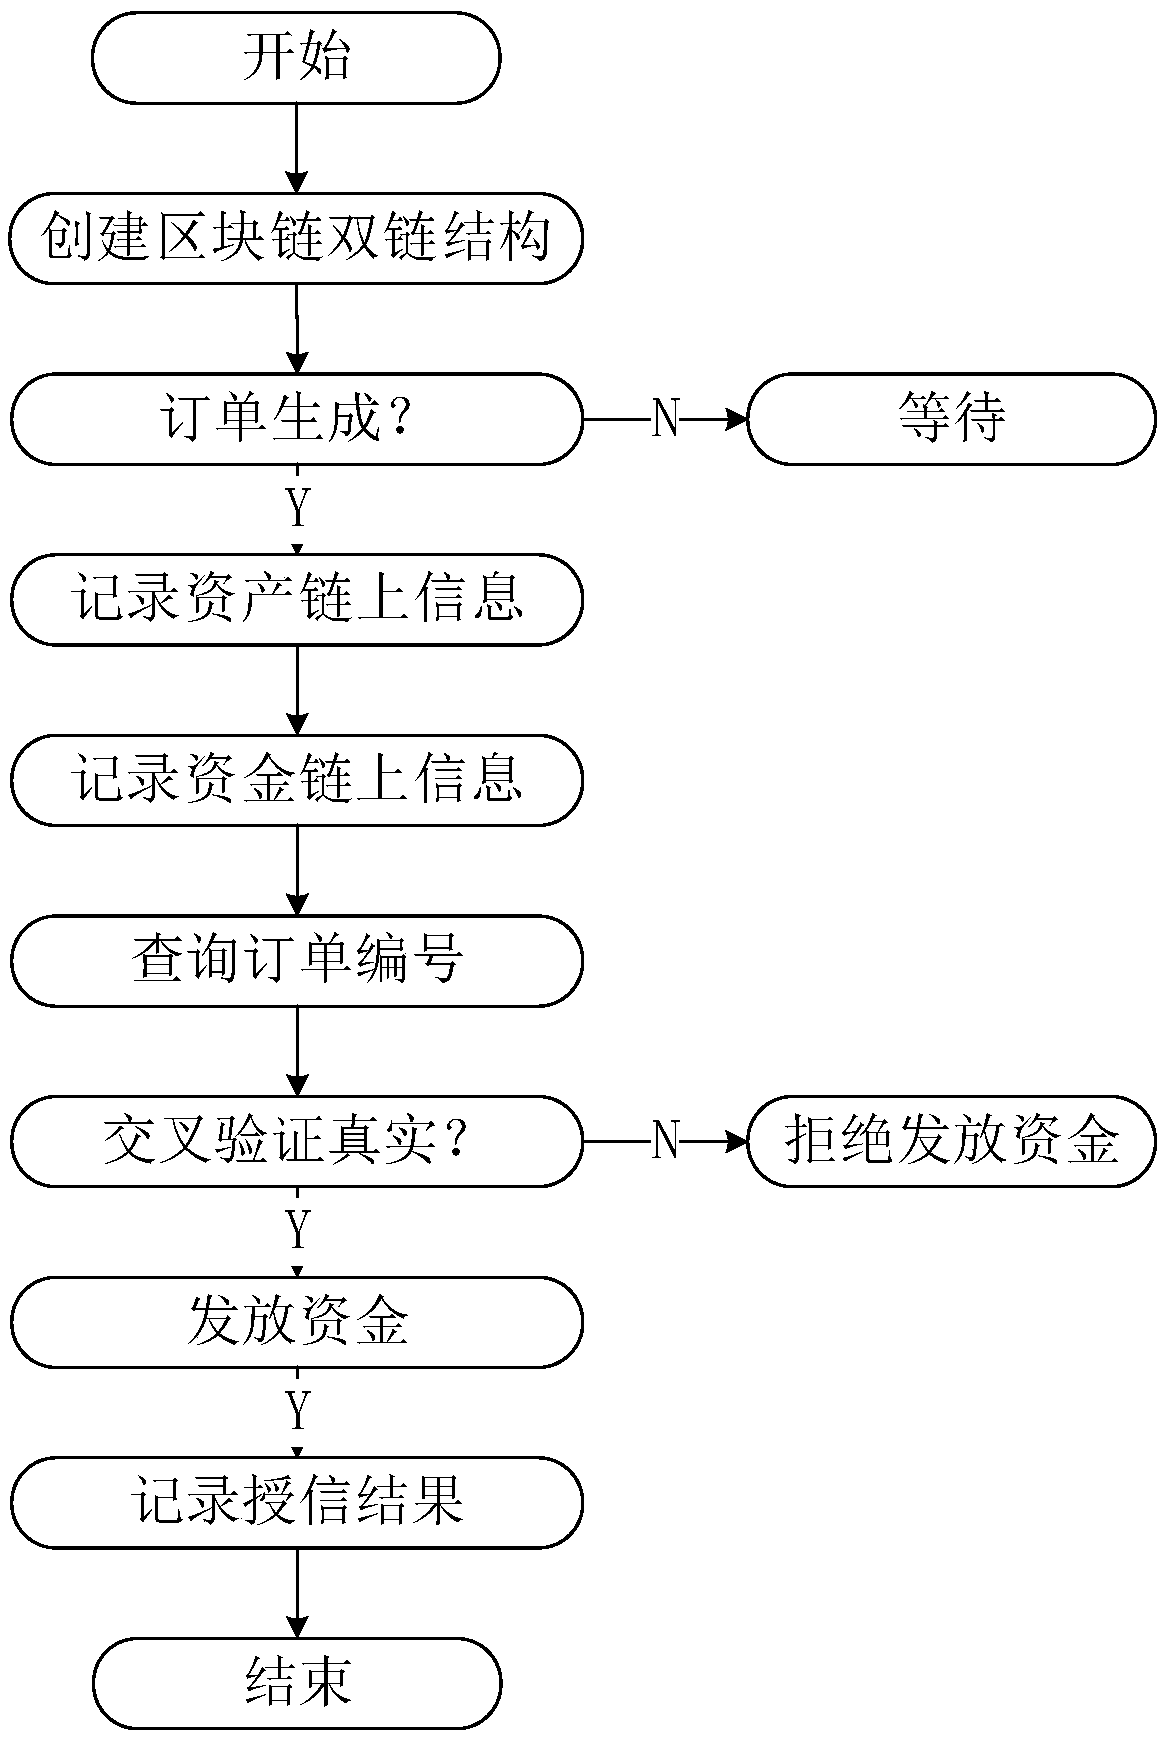 Supply chain finance implementation method and control system based on block chain double-chain structure